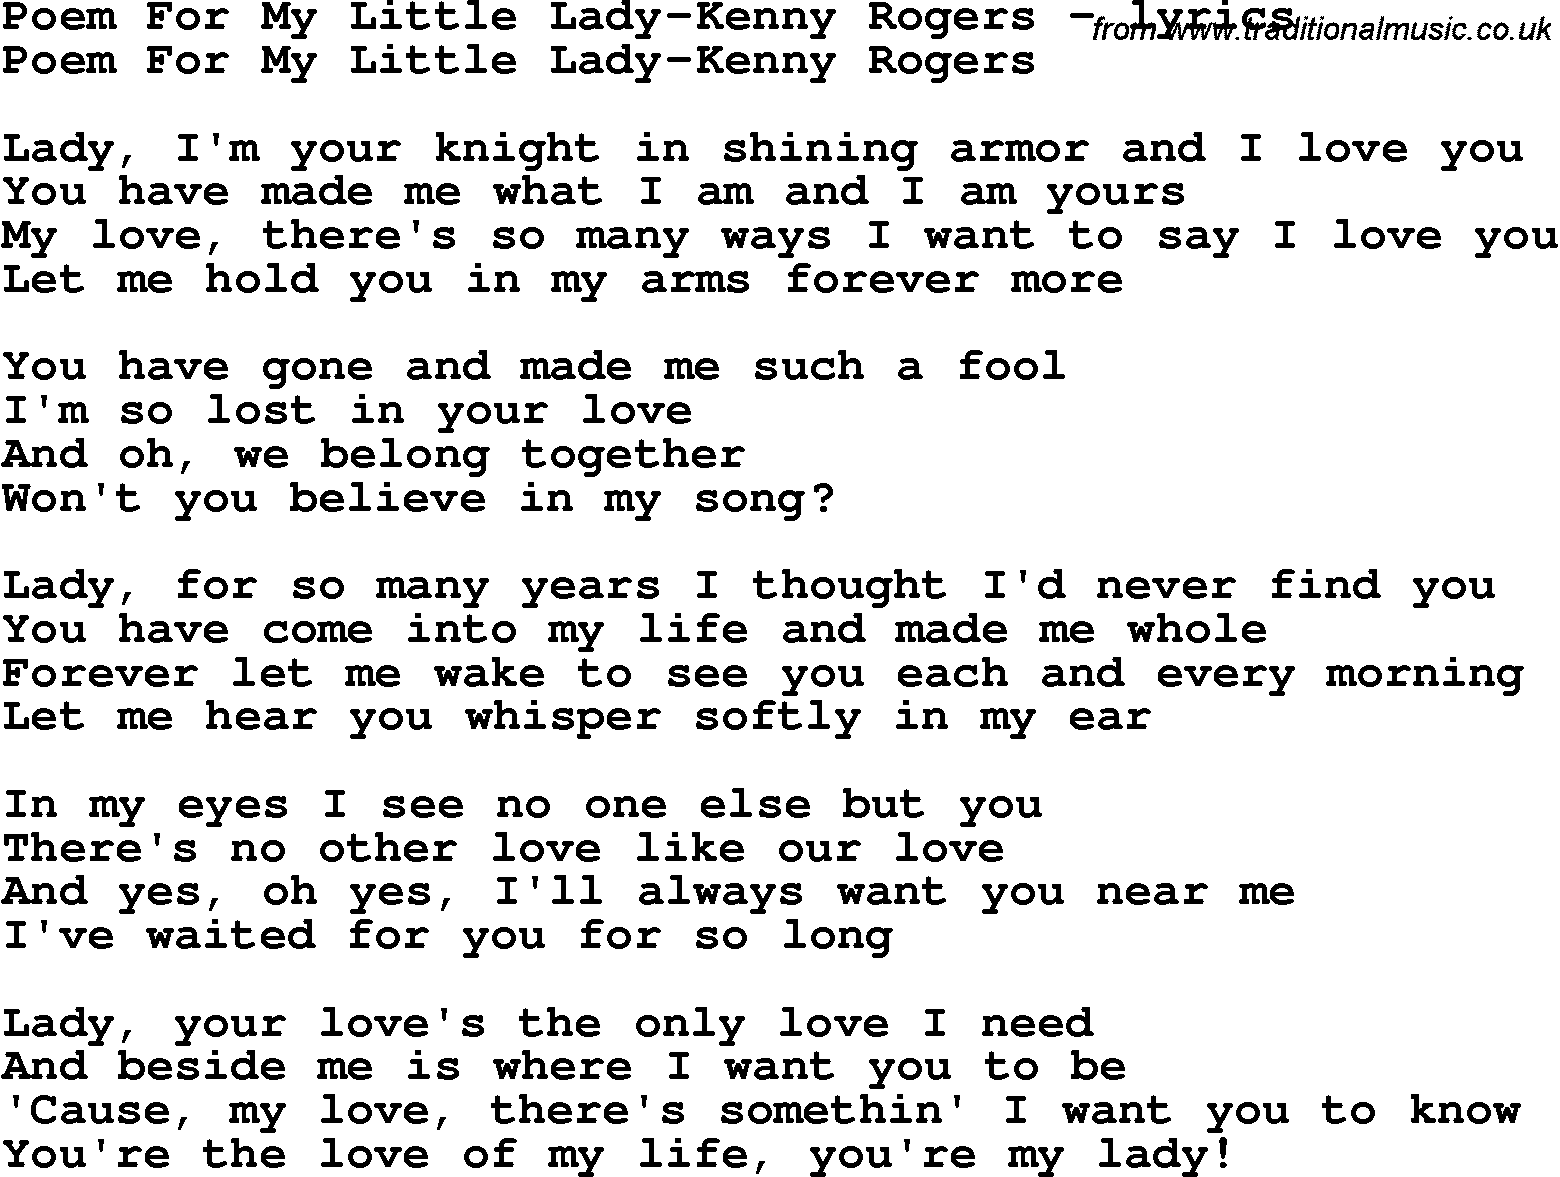 Love Song Lyrics for: Poem For My Little Lady-Kenny Rogers